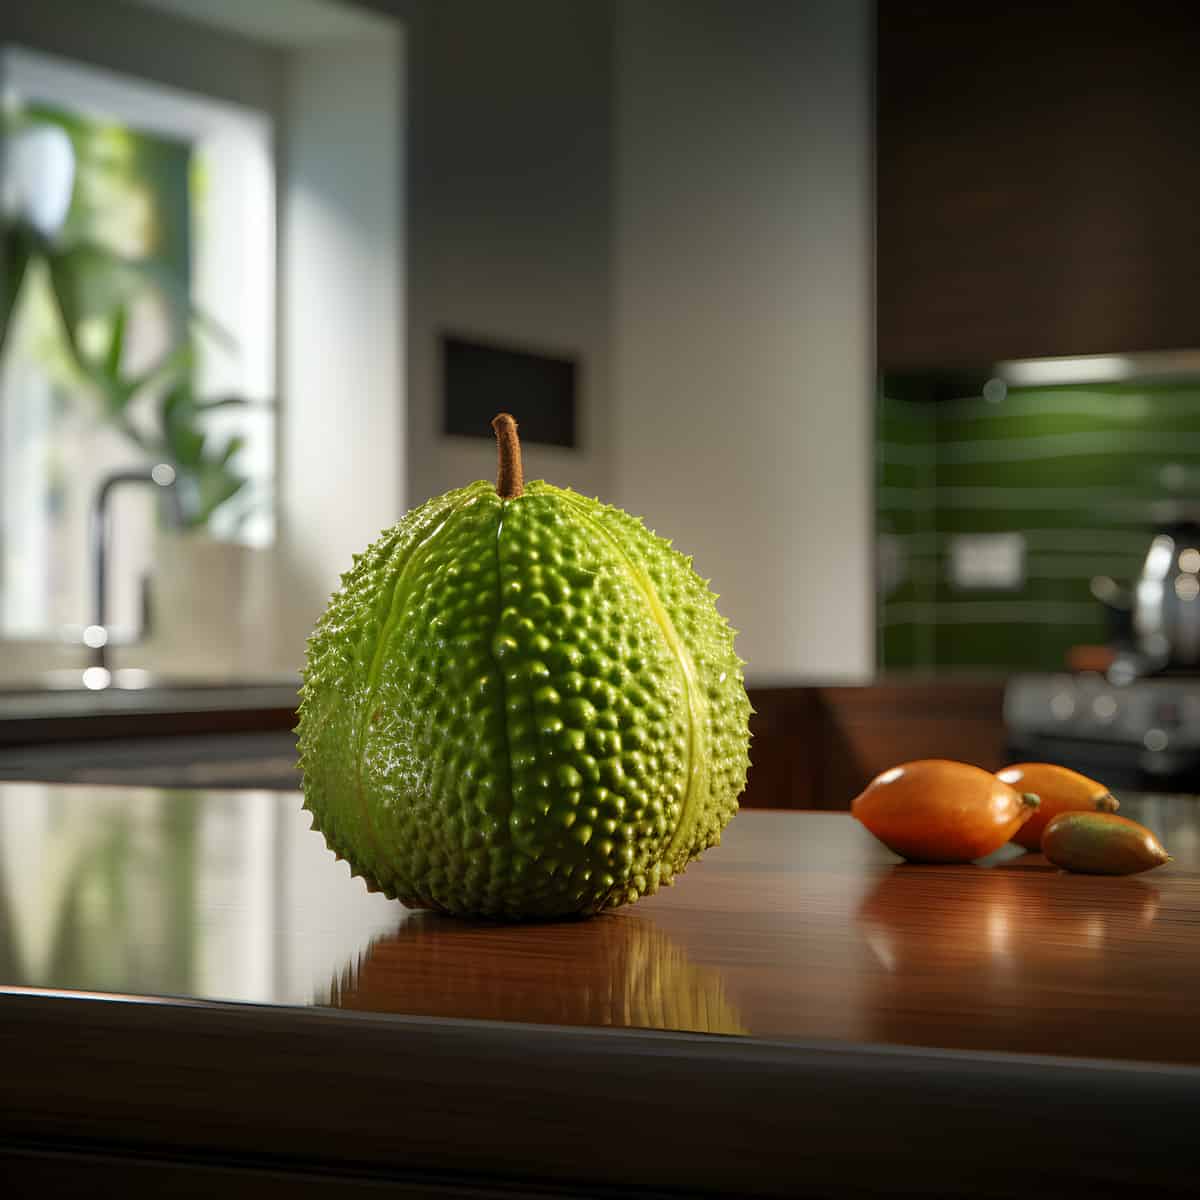 Breadnut Fruit on a kitchen counter